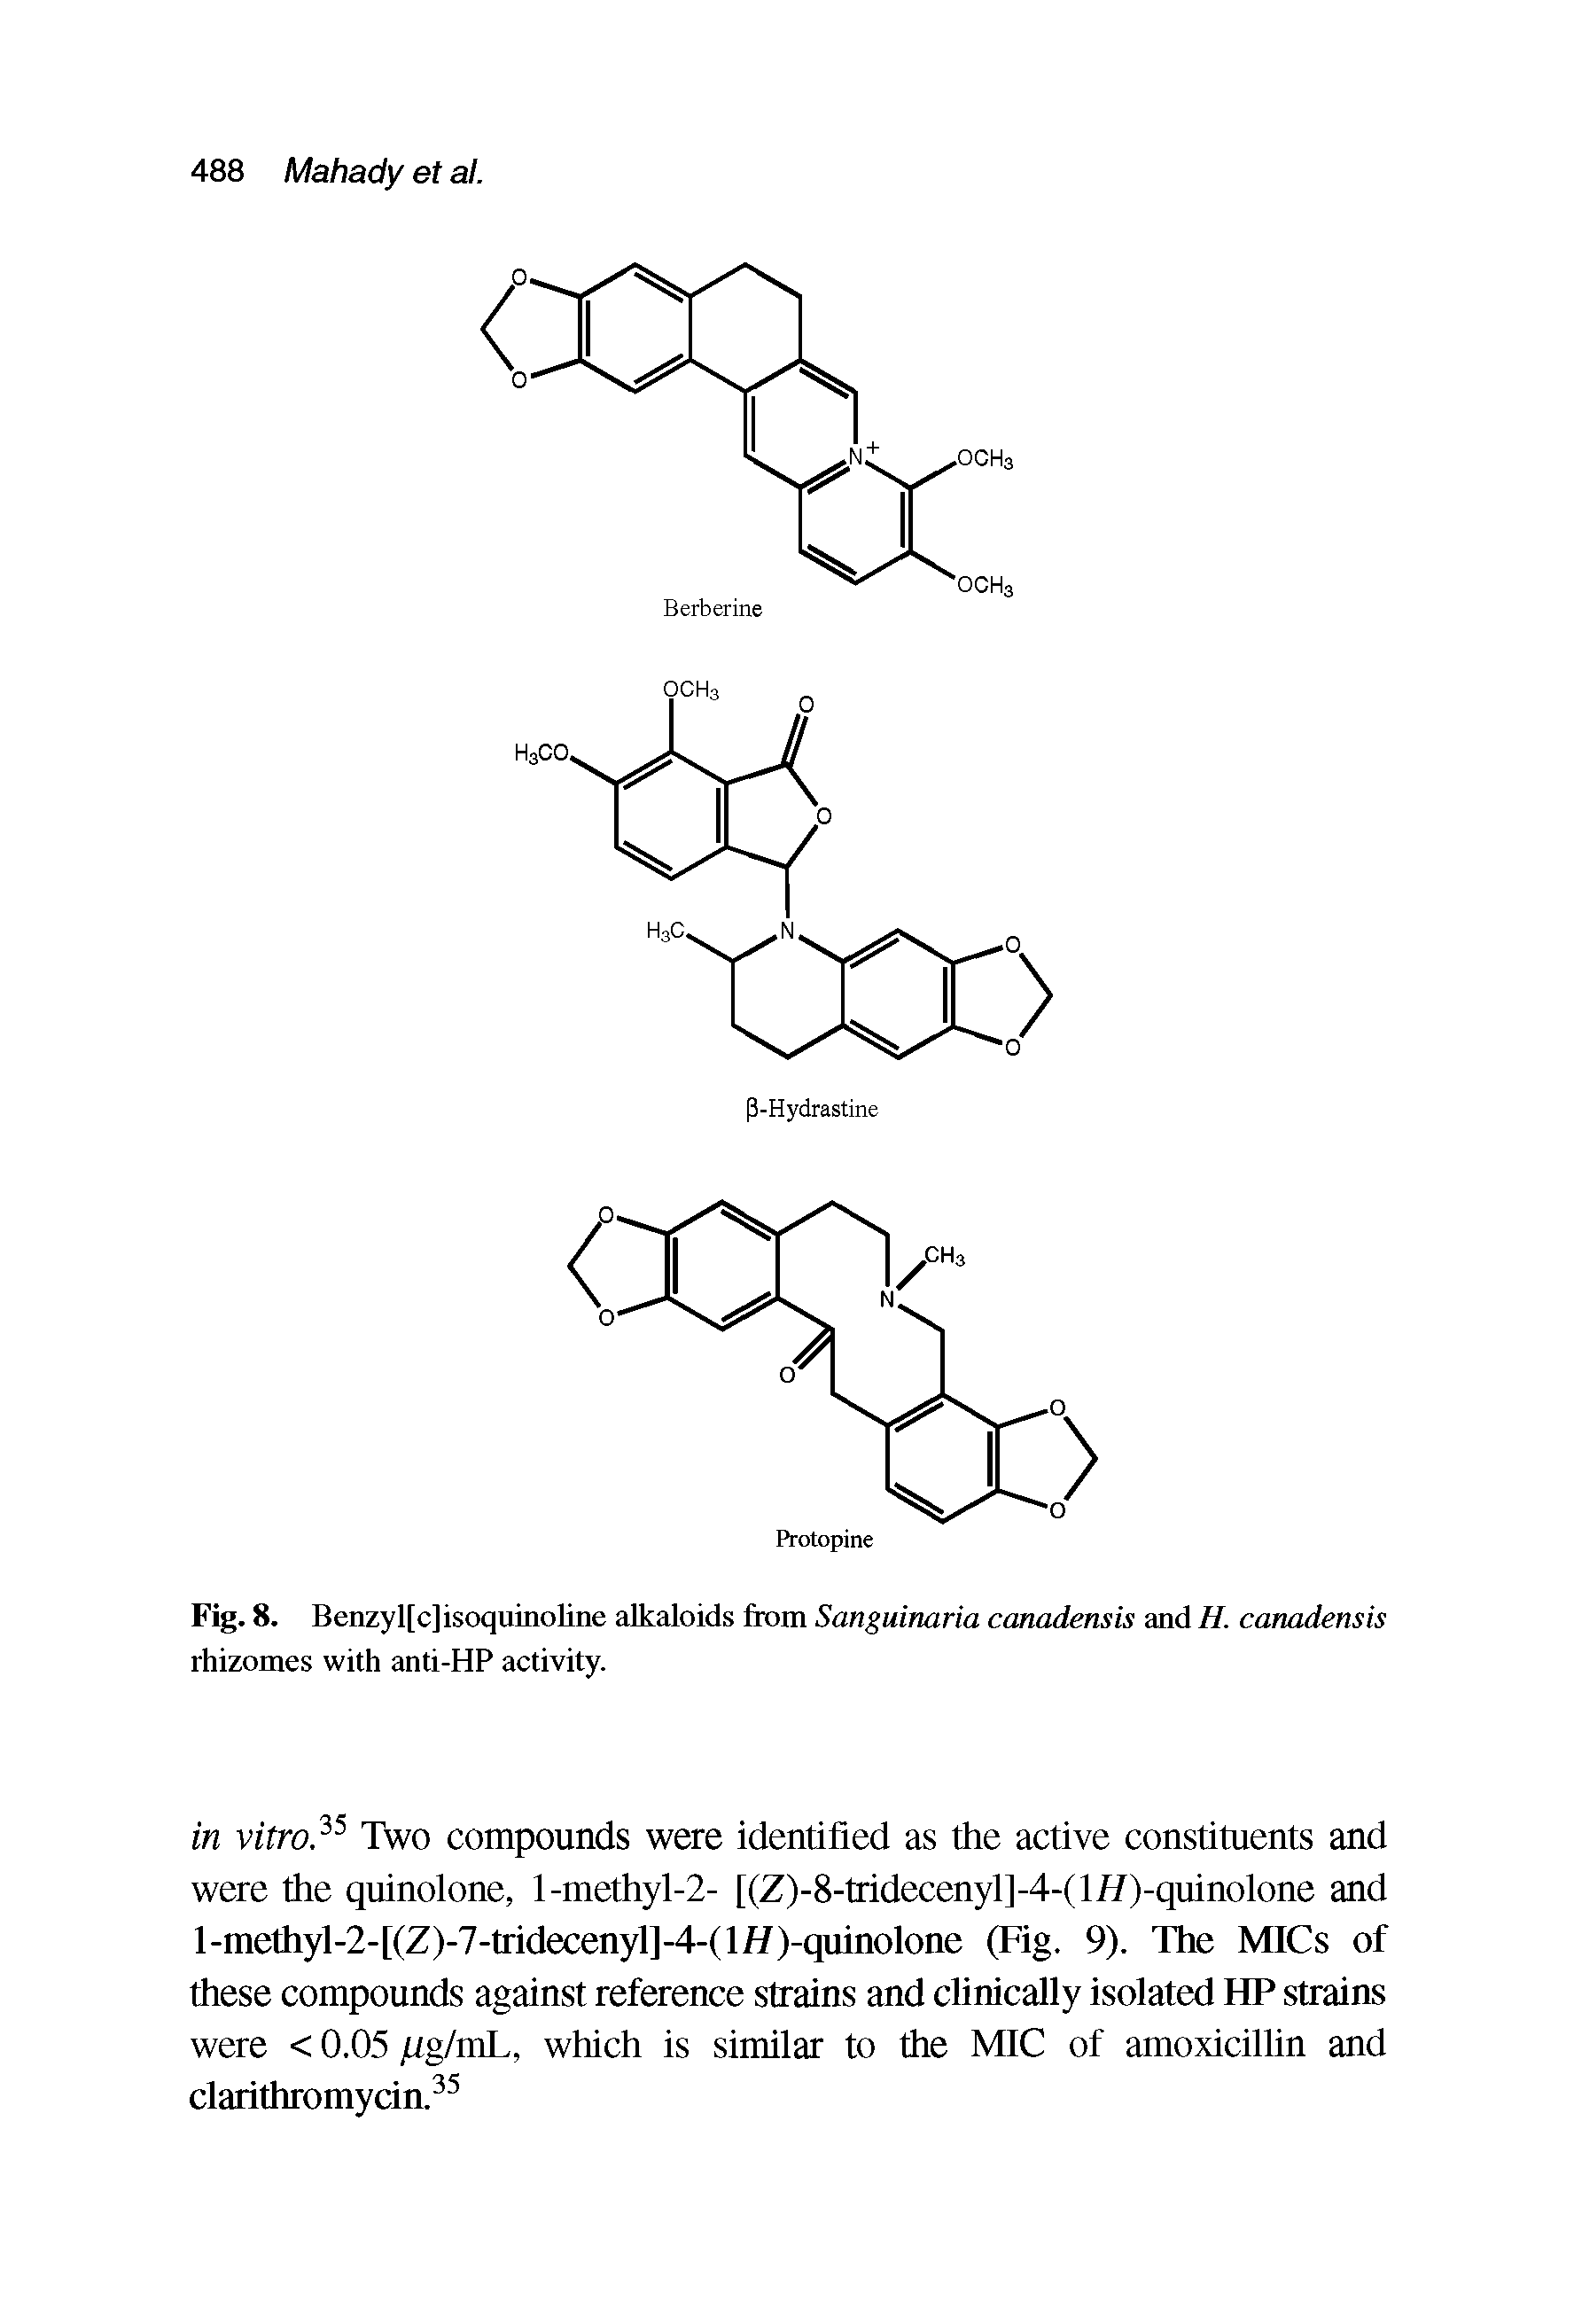 Fig. 8. Benzyl[c]isoquinoline alkaloids from Sanguinaria canadensis and H. canadensis rhizomes with anti-HP activity.